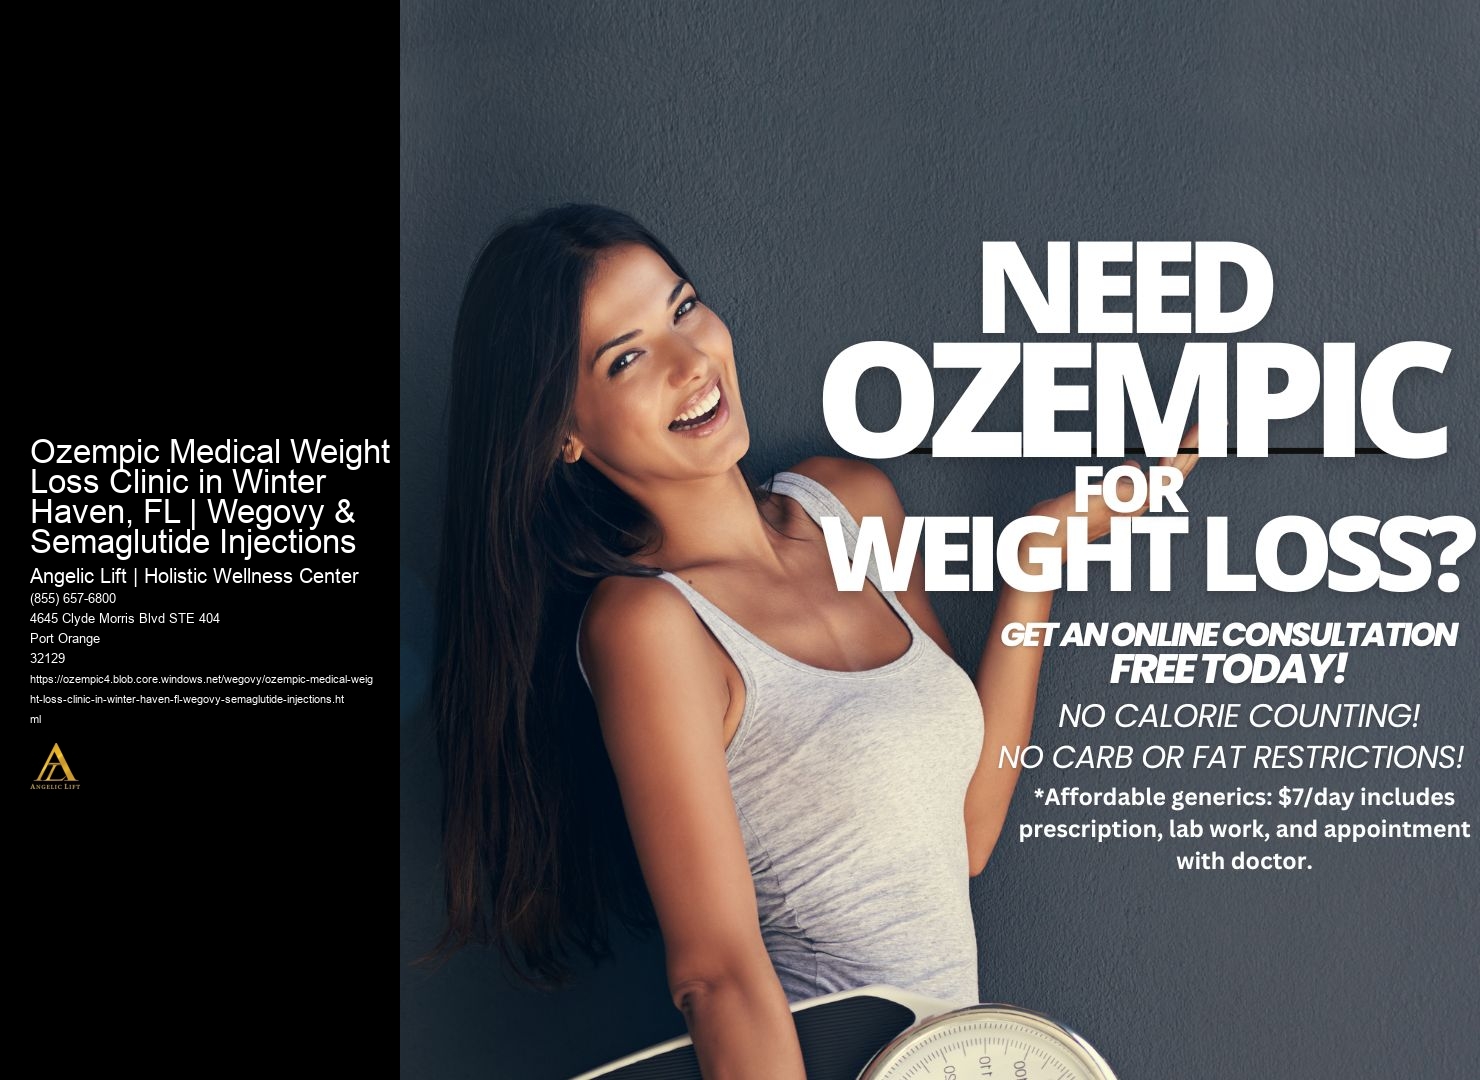 Ozempic Medical Weight Loss Clinic in Winter Haven, FL | Wegovy & Semaglutide Injections